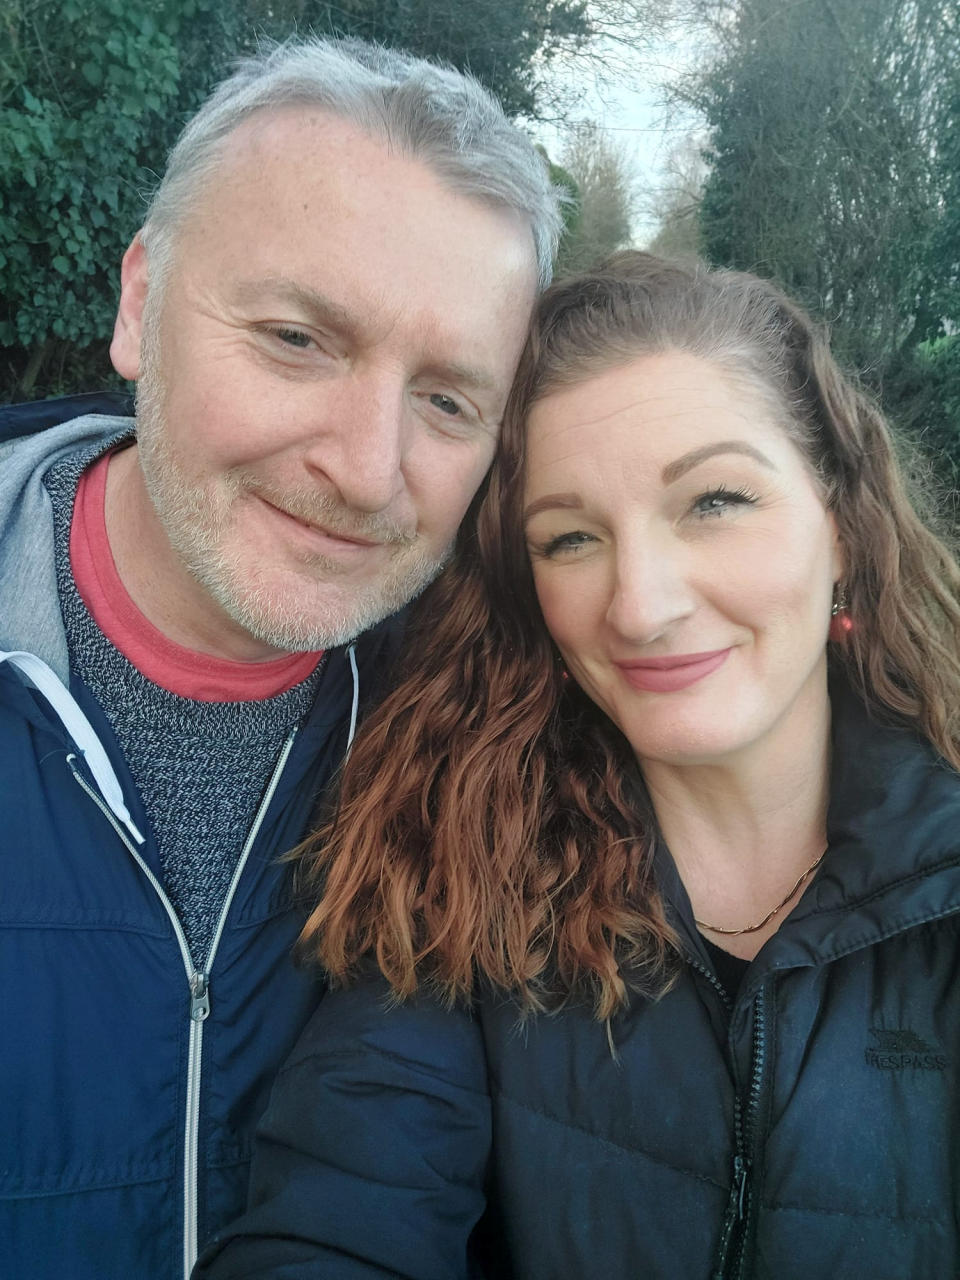 Liz and David Murphy purchased the historic rural hamlet of Lac De Maison, in Poitou-Charentes, south west France, in January 2021. See SWNS story SWLNfrance. A family living 